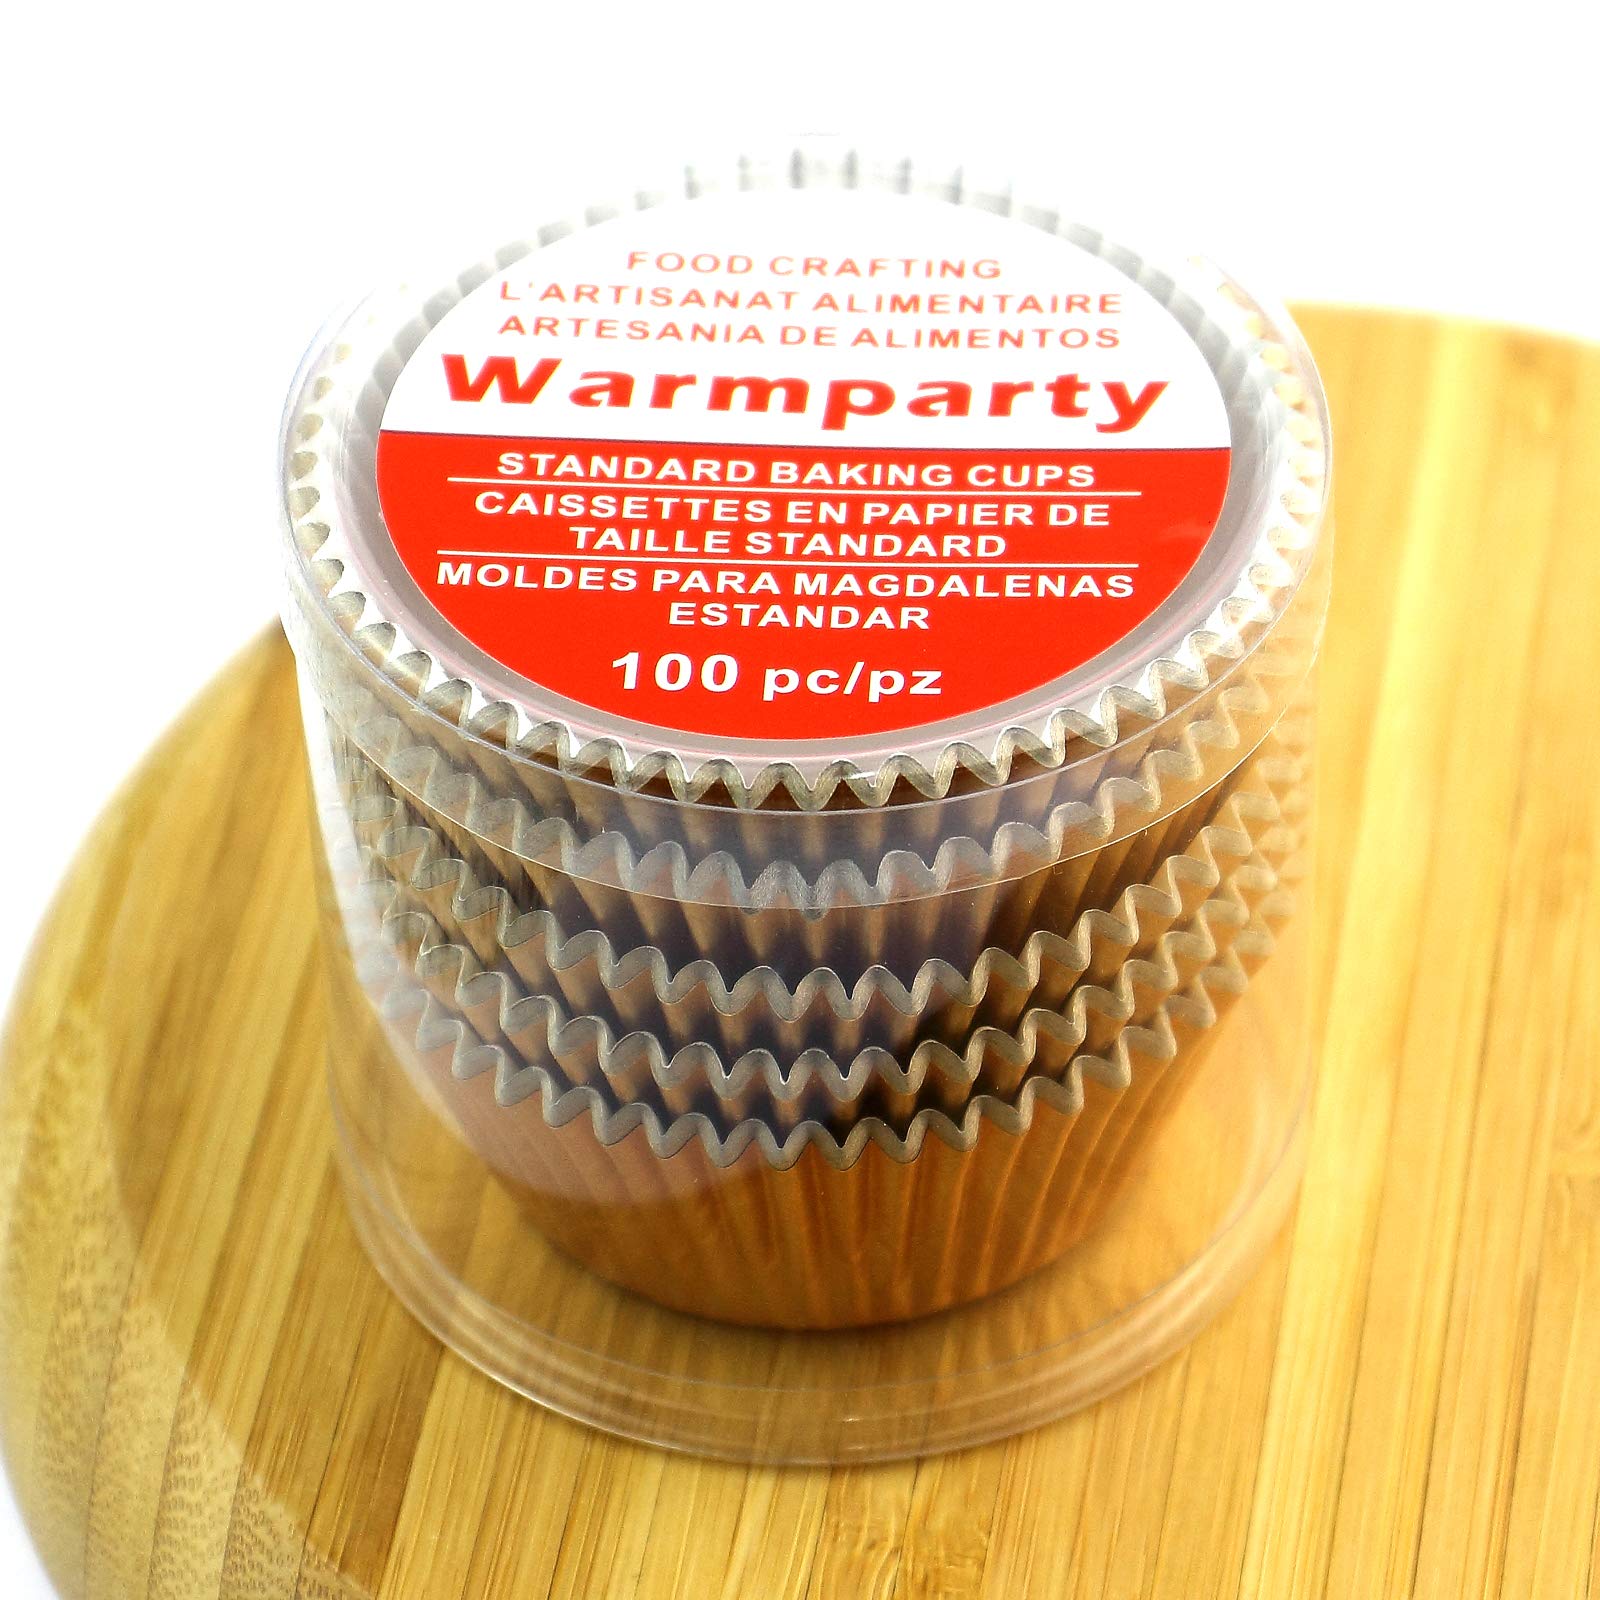 Warmparty Gold Foil Baking Cups Muffin Wrappers Cupcake Liners Standard, 100 Count